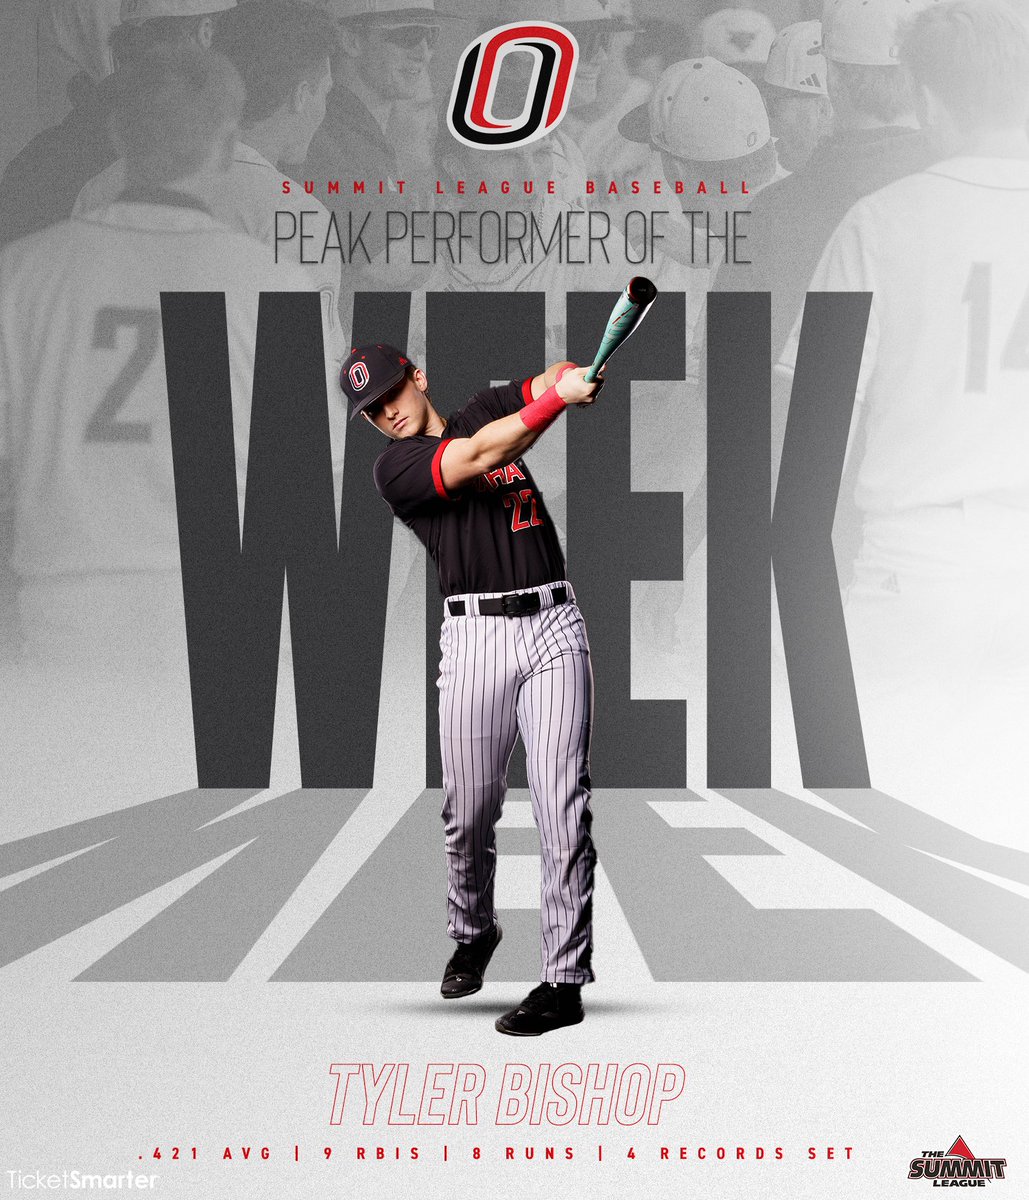 𝐖𝐡𝐨 𝐃𝐢𝐝𝐧'𝐭 𝐒𝐞𝐞 𝐓𝐡𝐢𝐬 𝐂𝐨𝐦𝐢𝐧𝐠⚫️🔴⚾️ Bolstered by one of the greatest single game performances you will ever see, Tyler Bishop has been named the @TicketSmarter Summit League Peak Performer of the Week🥇 📰bit.ly/3VUMbqg #OmahaBSB